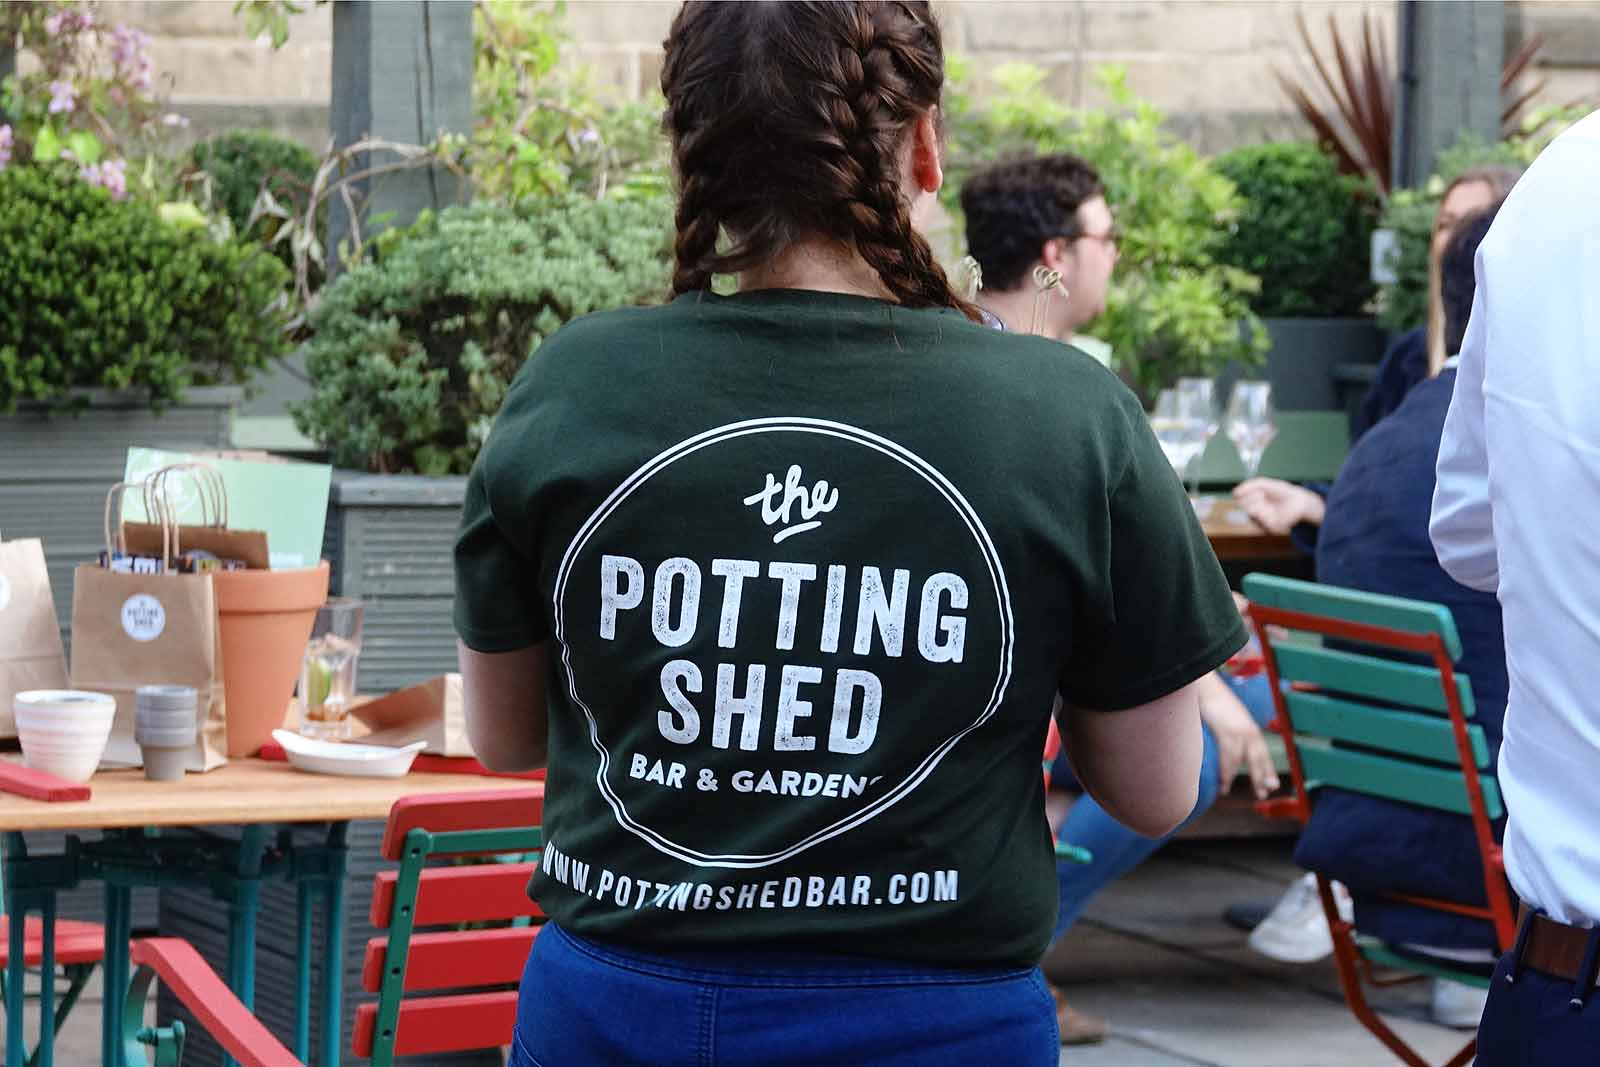 The Potting Shed Opens in Harrogate